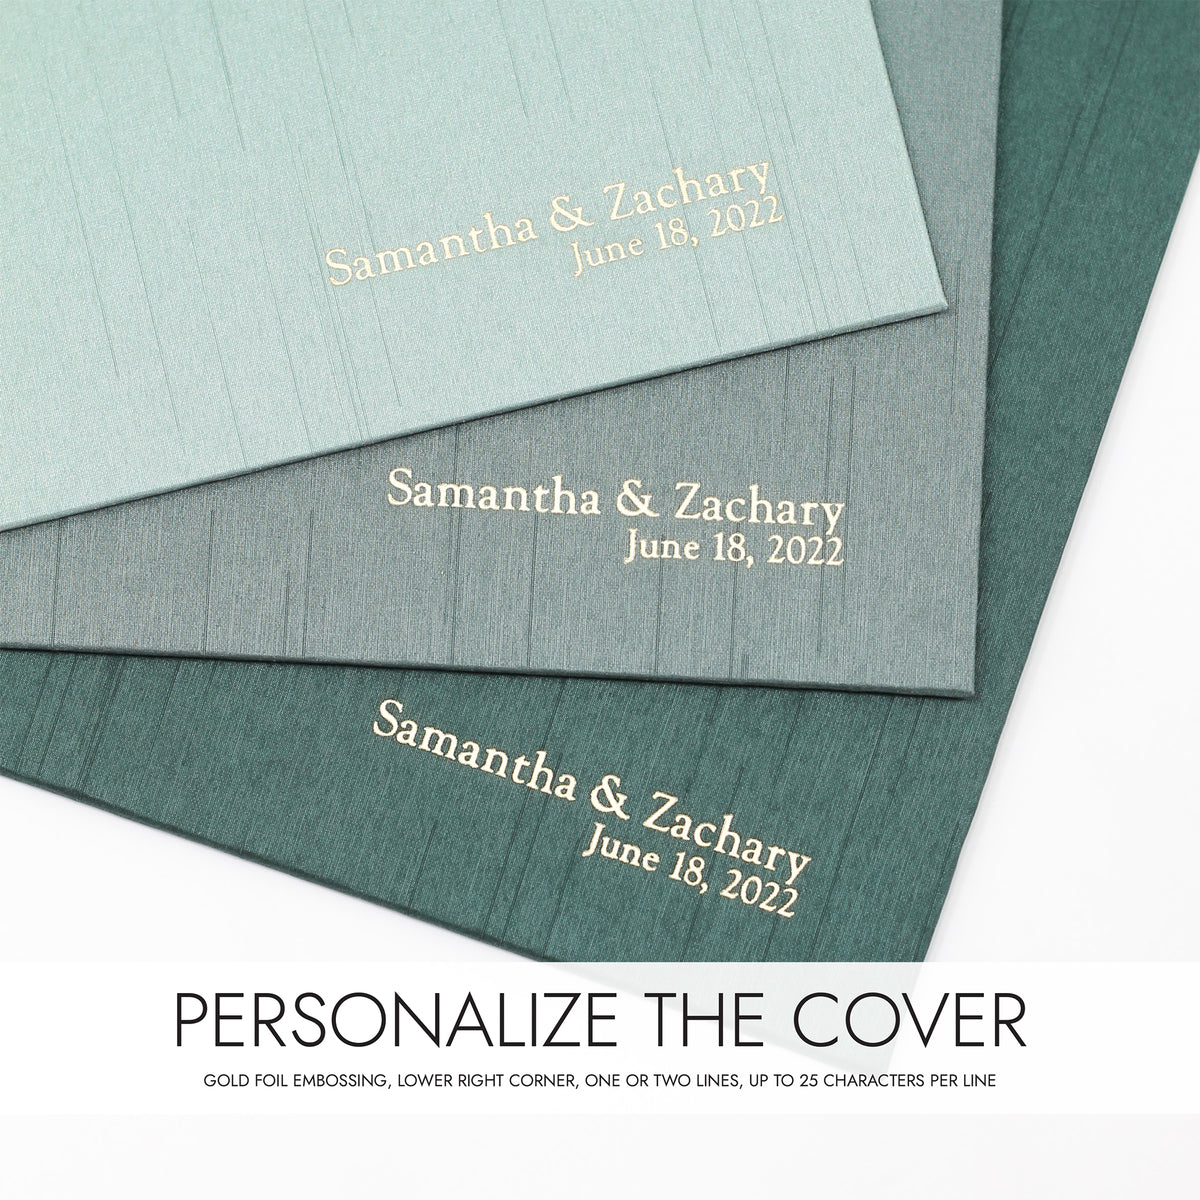 Deluxe 12 x 15 Paper Page Album | Cover: Emerald Silk | Available Personalized